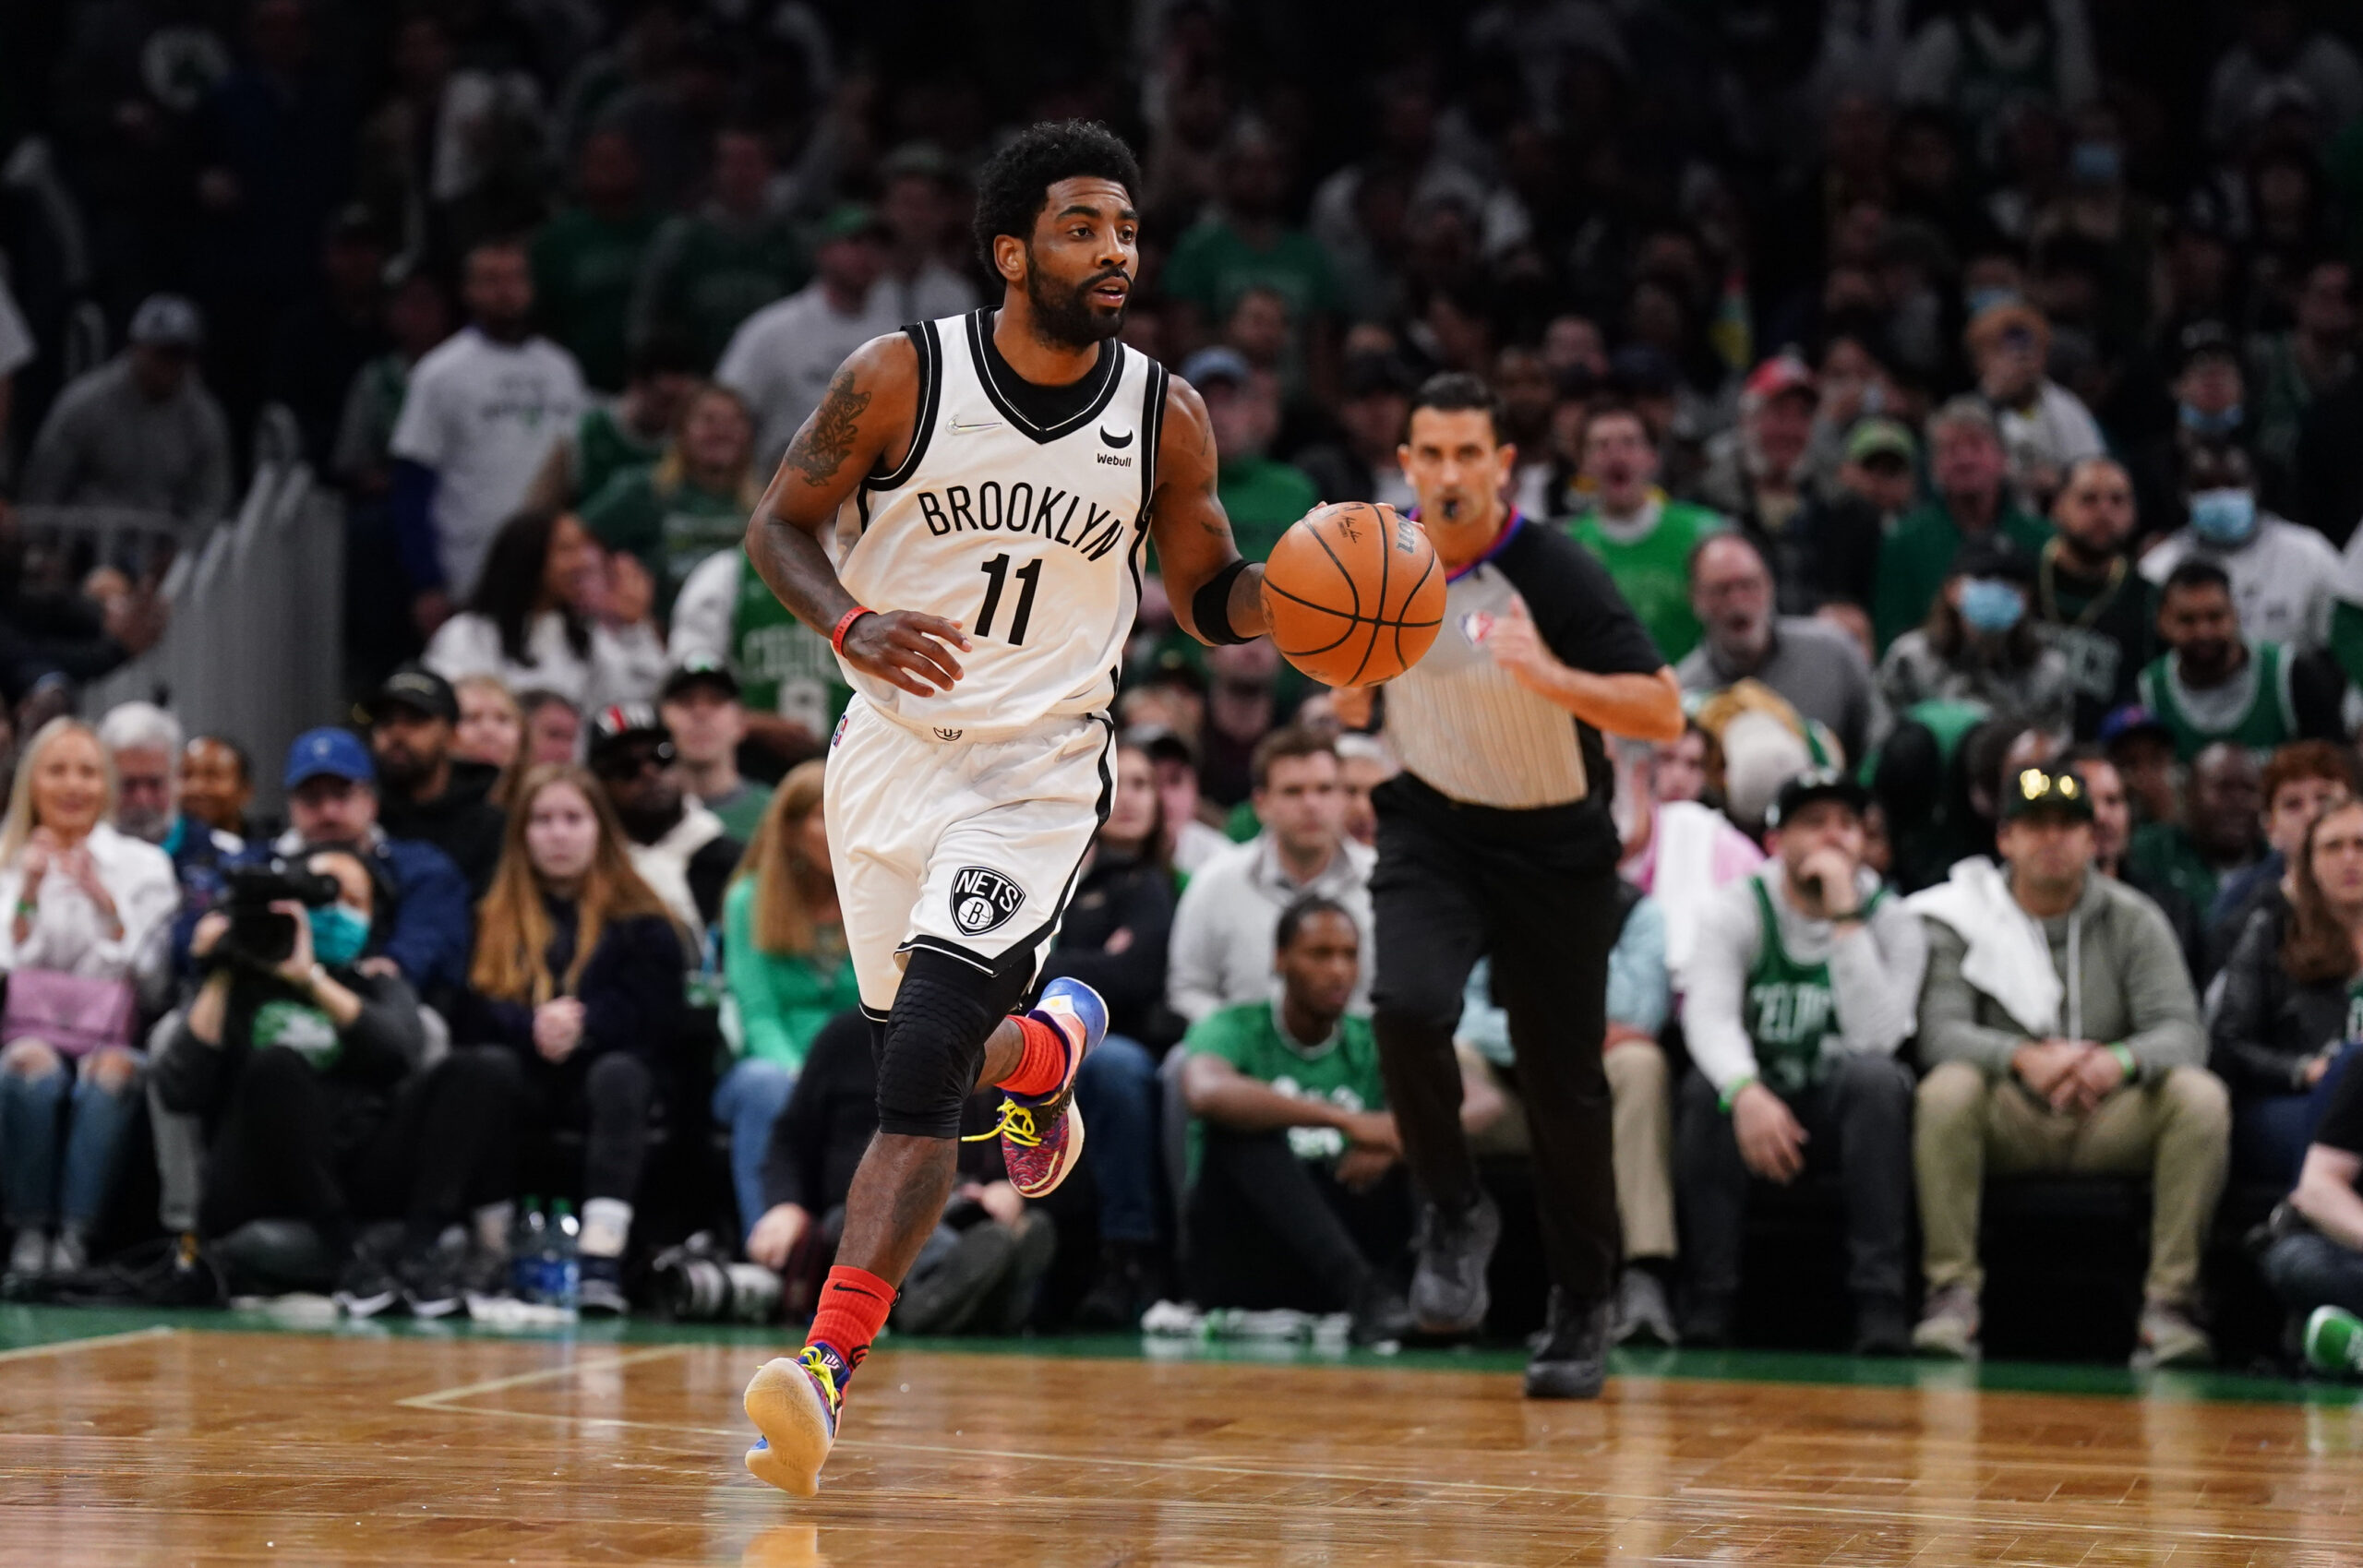 Brooklyn Nets at Boston Celtics Game 2 odds, picks and predictions